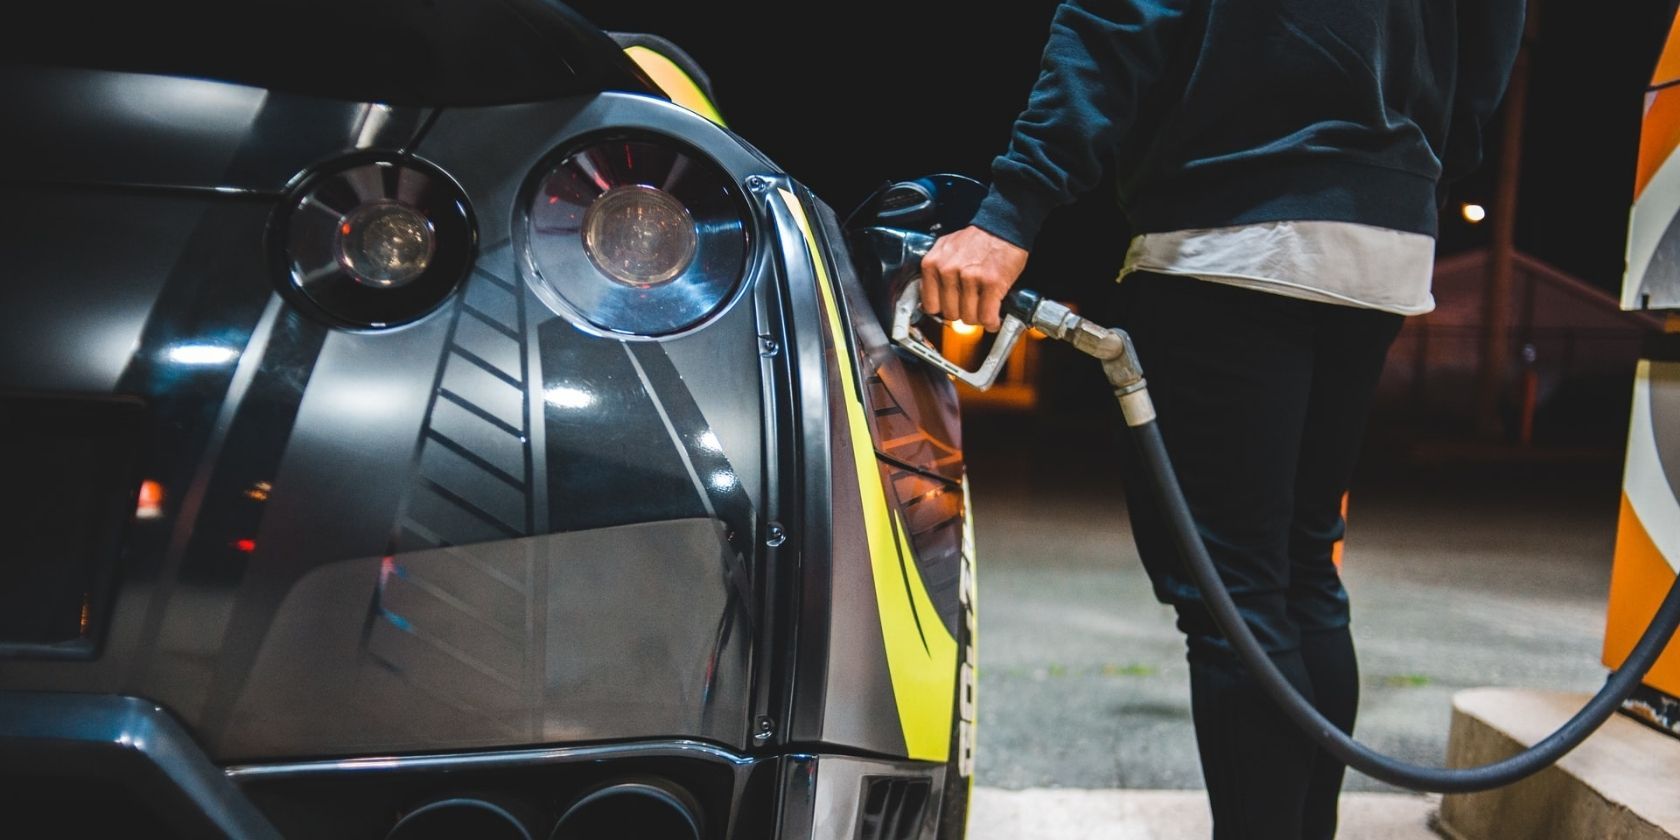 man in a blue jacket pumping gas in a black car with yellow stripe